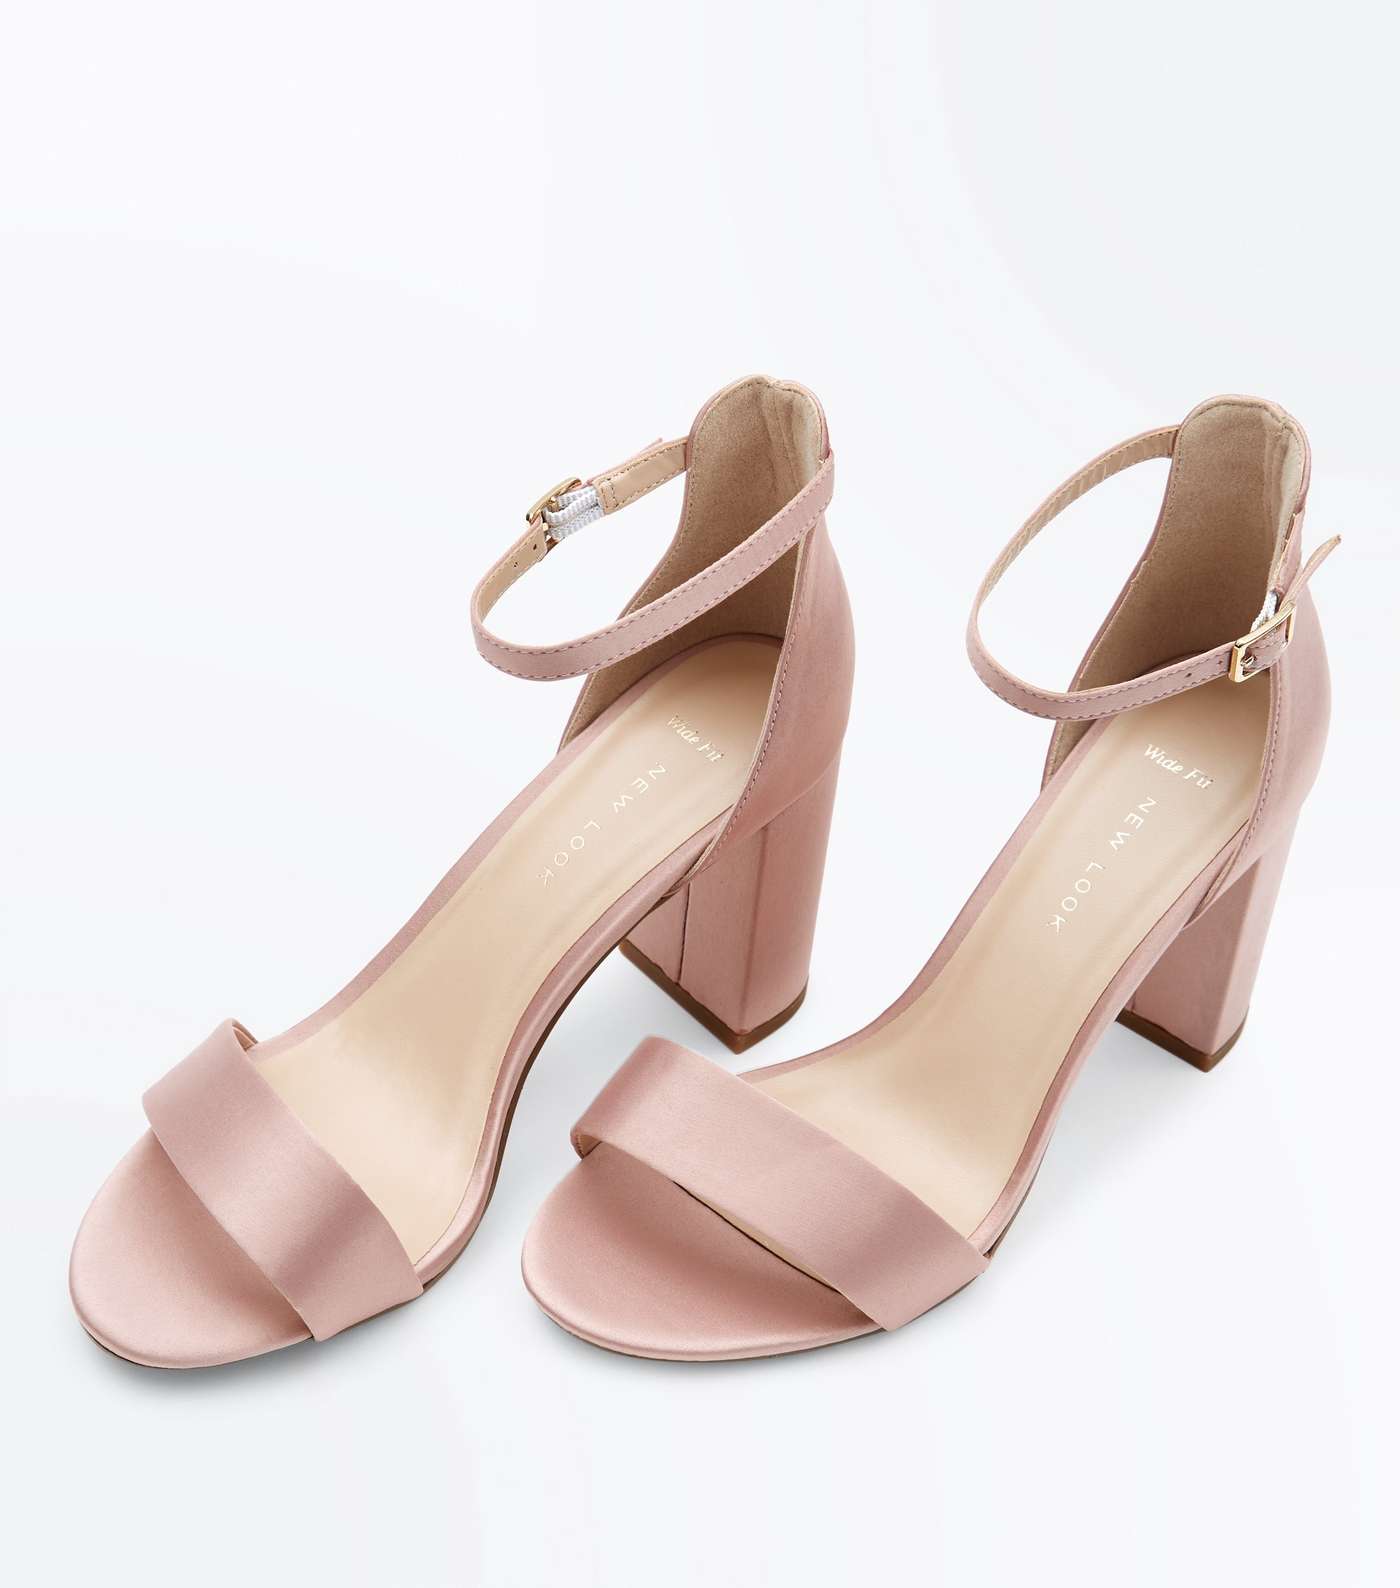 Wide Fit Nude Satin Ankle Strap Block Heels Image 4